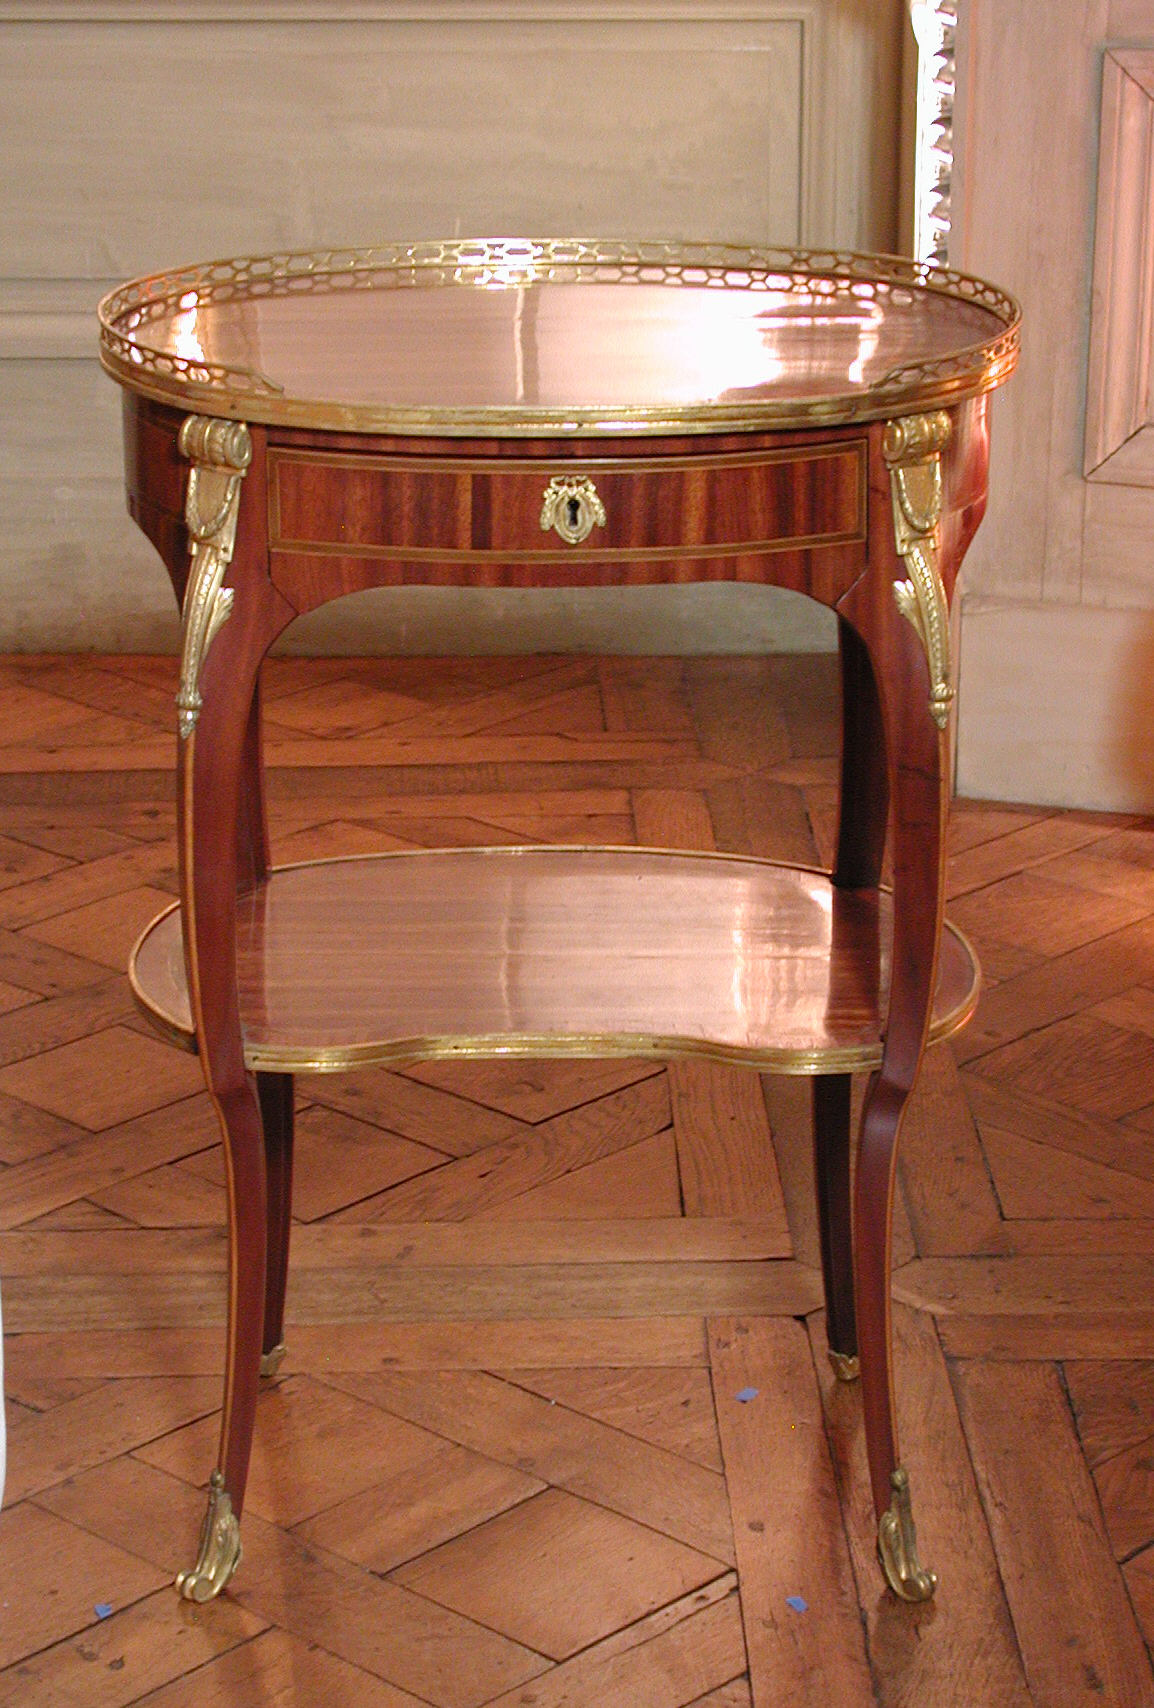 Roger Vandercruse, called Lacroix table Small French, Metropolitan Art Paris (one | writing a pair) | Museum | of oval of The